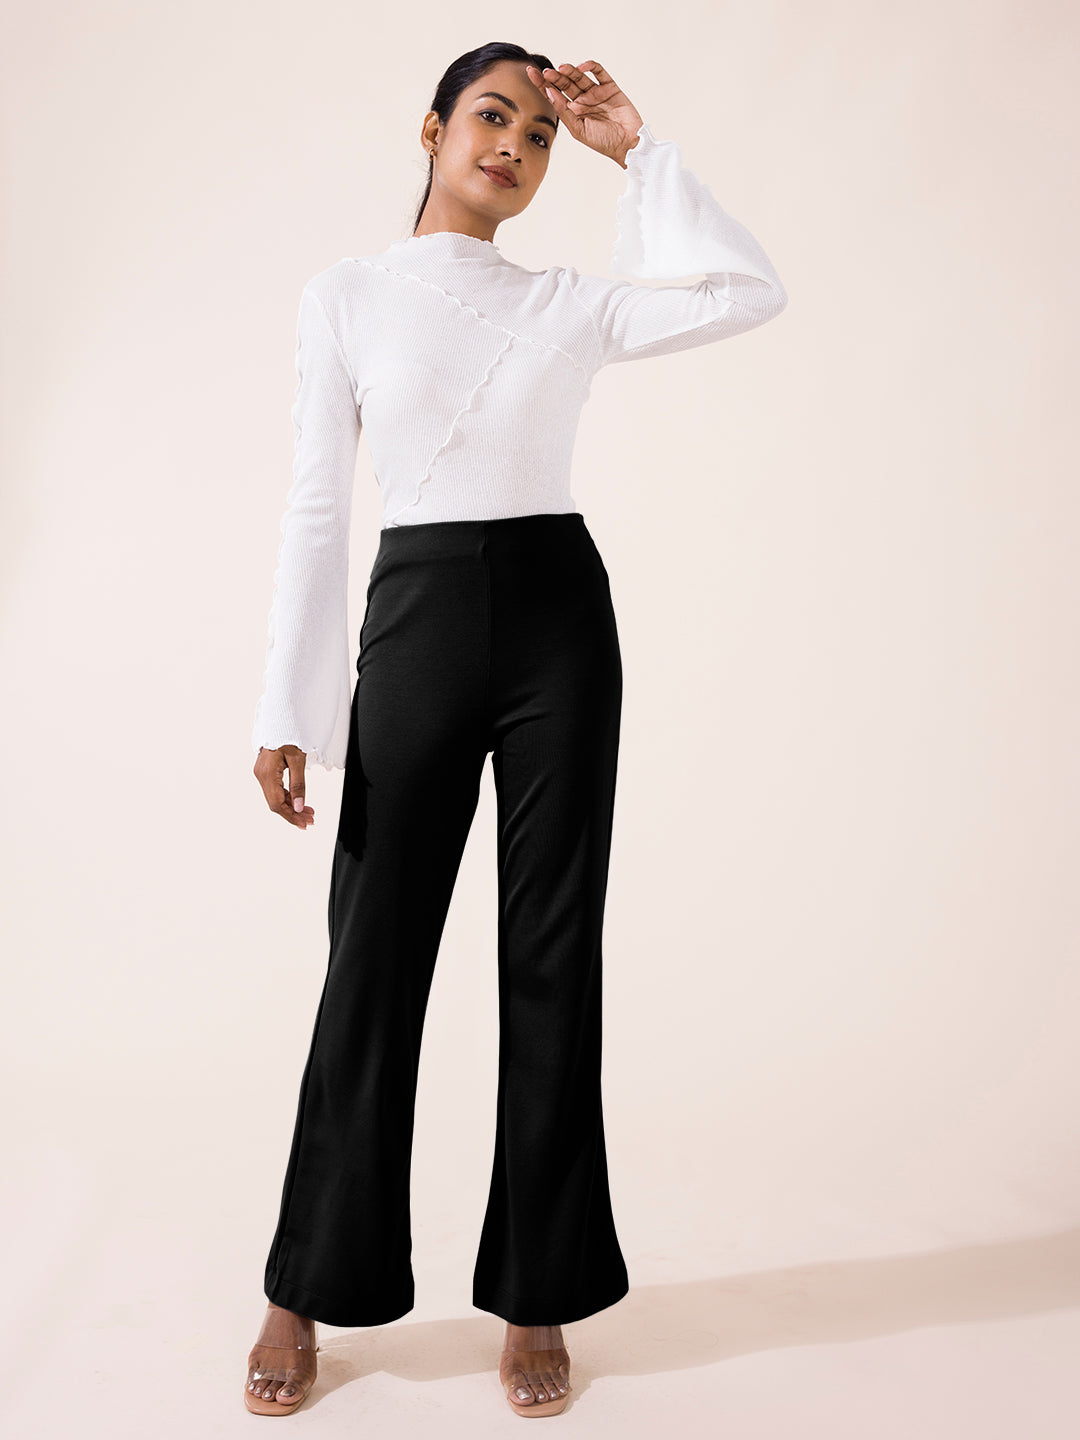 Waitress Black Pants|high Waist Flare Pants For Women - Korean Style Casual  Office Trousers